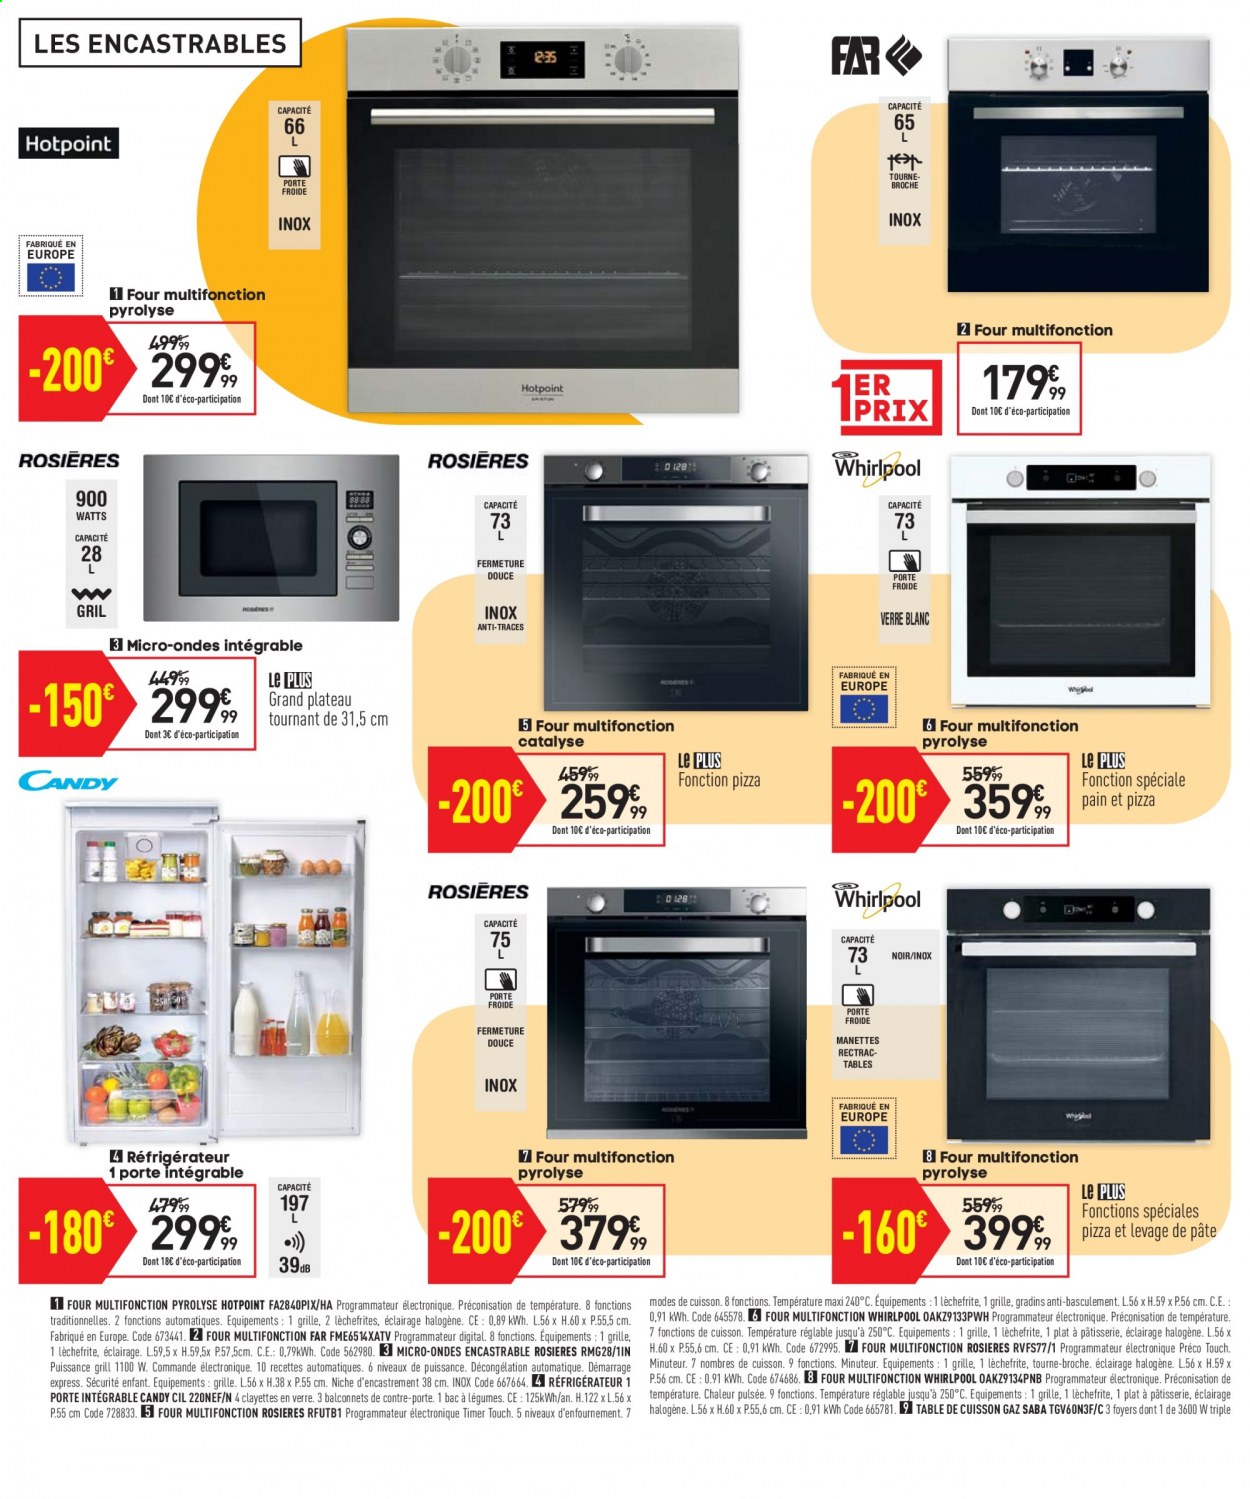 thumbnail - Catalogue Conforama - 30/03/2021 - 26/04/2021 - Produits soldés - Candy, Hotpoint, Whirlpool, verre. Page 24.